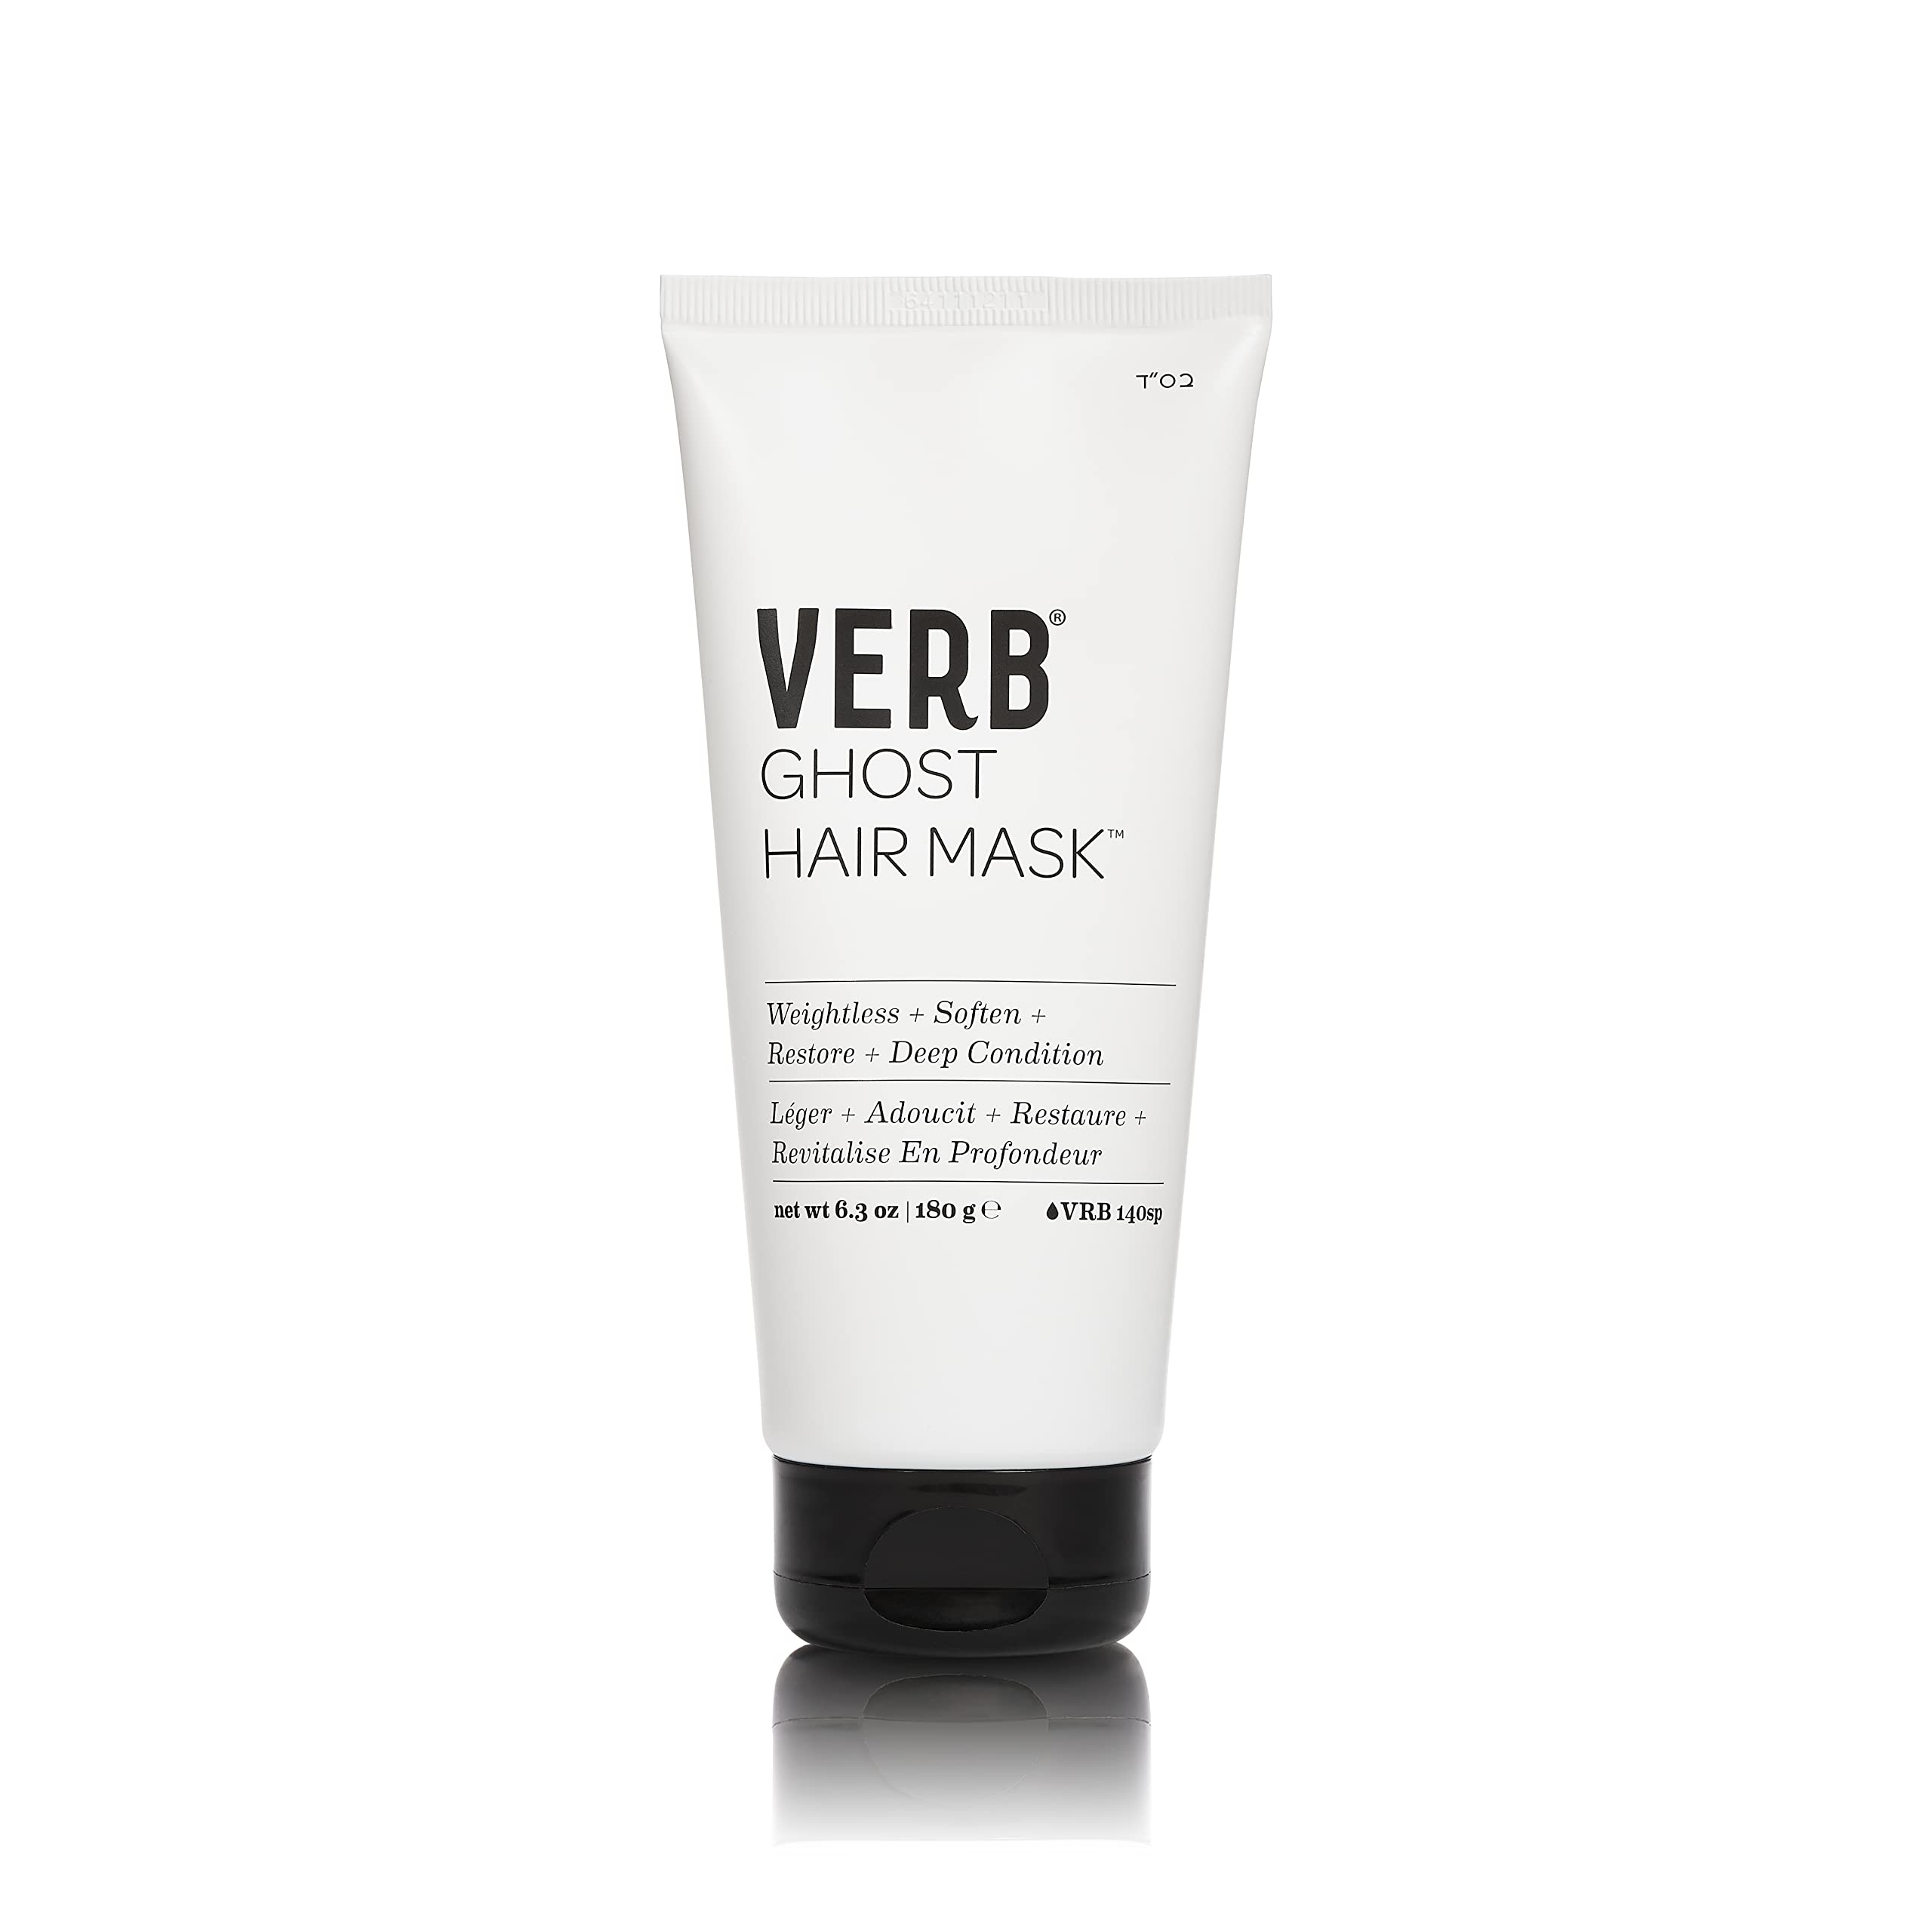 VERB Ghost Hair Mask - Vegan Deep Conditioning Hair Treatment – Repair Hair Mask for Damaged Hair – Intense Hydration Mask with Moringa Oil Defrizzes and Promotes Shine, 6.3 fl oz